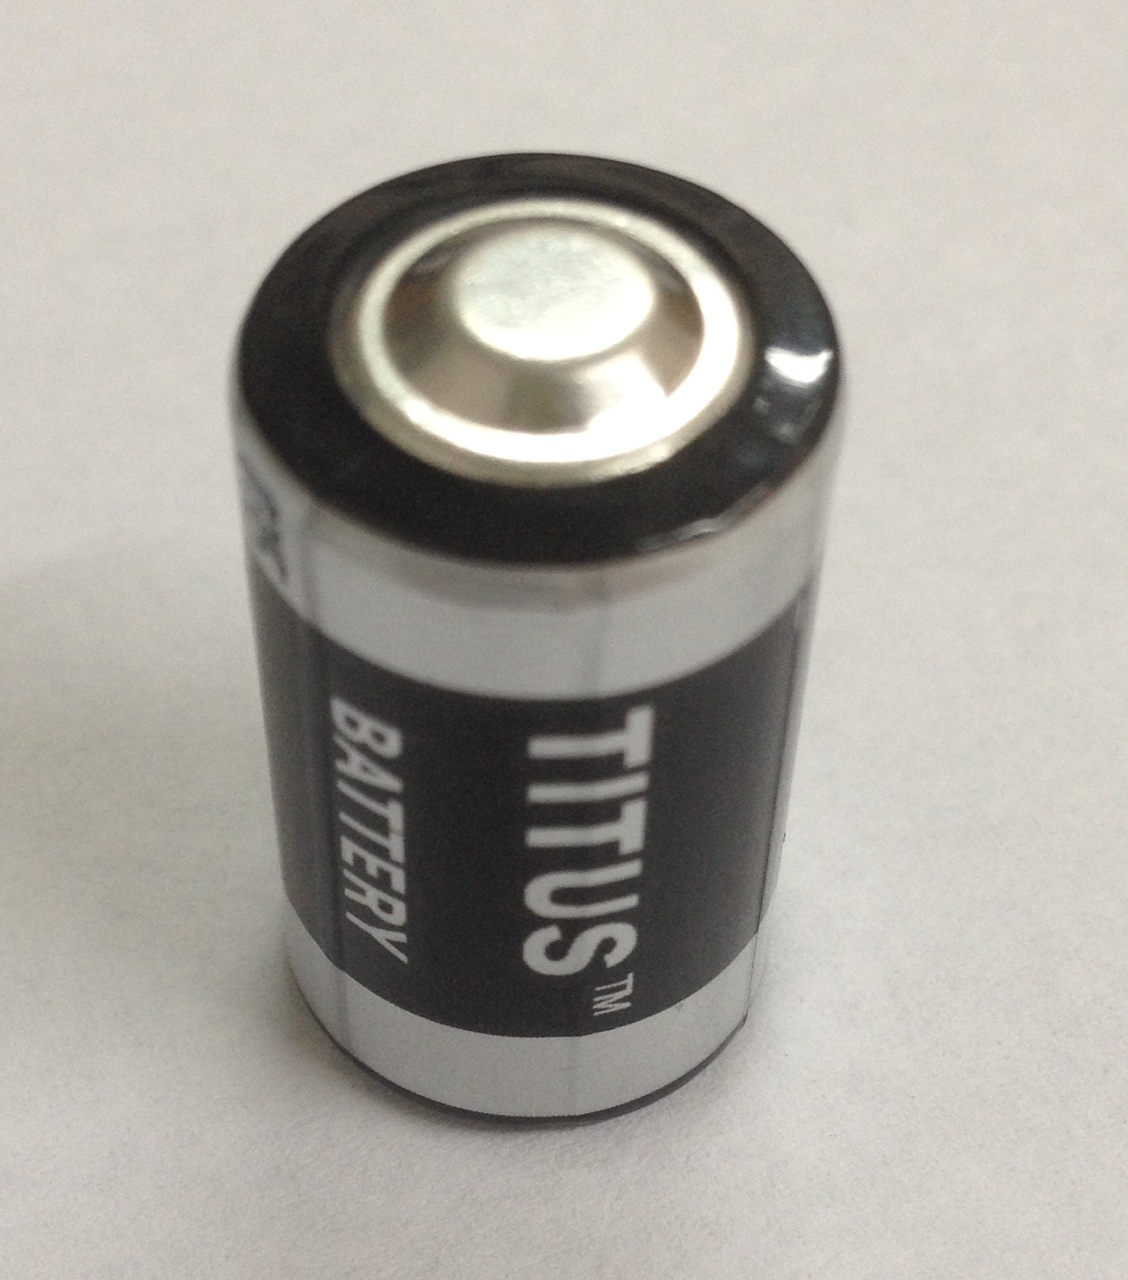 Titus 1/2 AA Size 3.6V ER14250MT High Energy Lithium Battery With Solder Tabs - 10 Pack + Free Shipping!